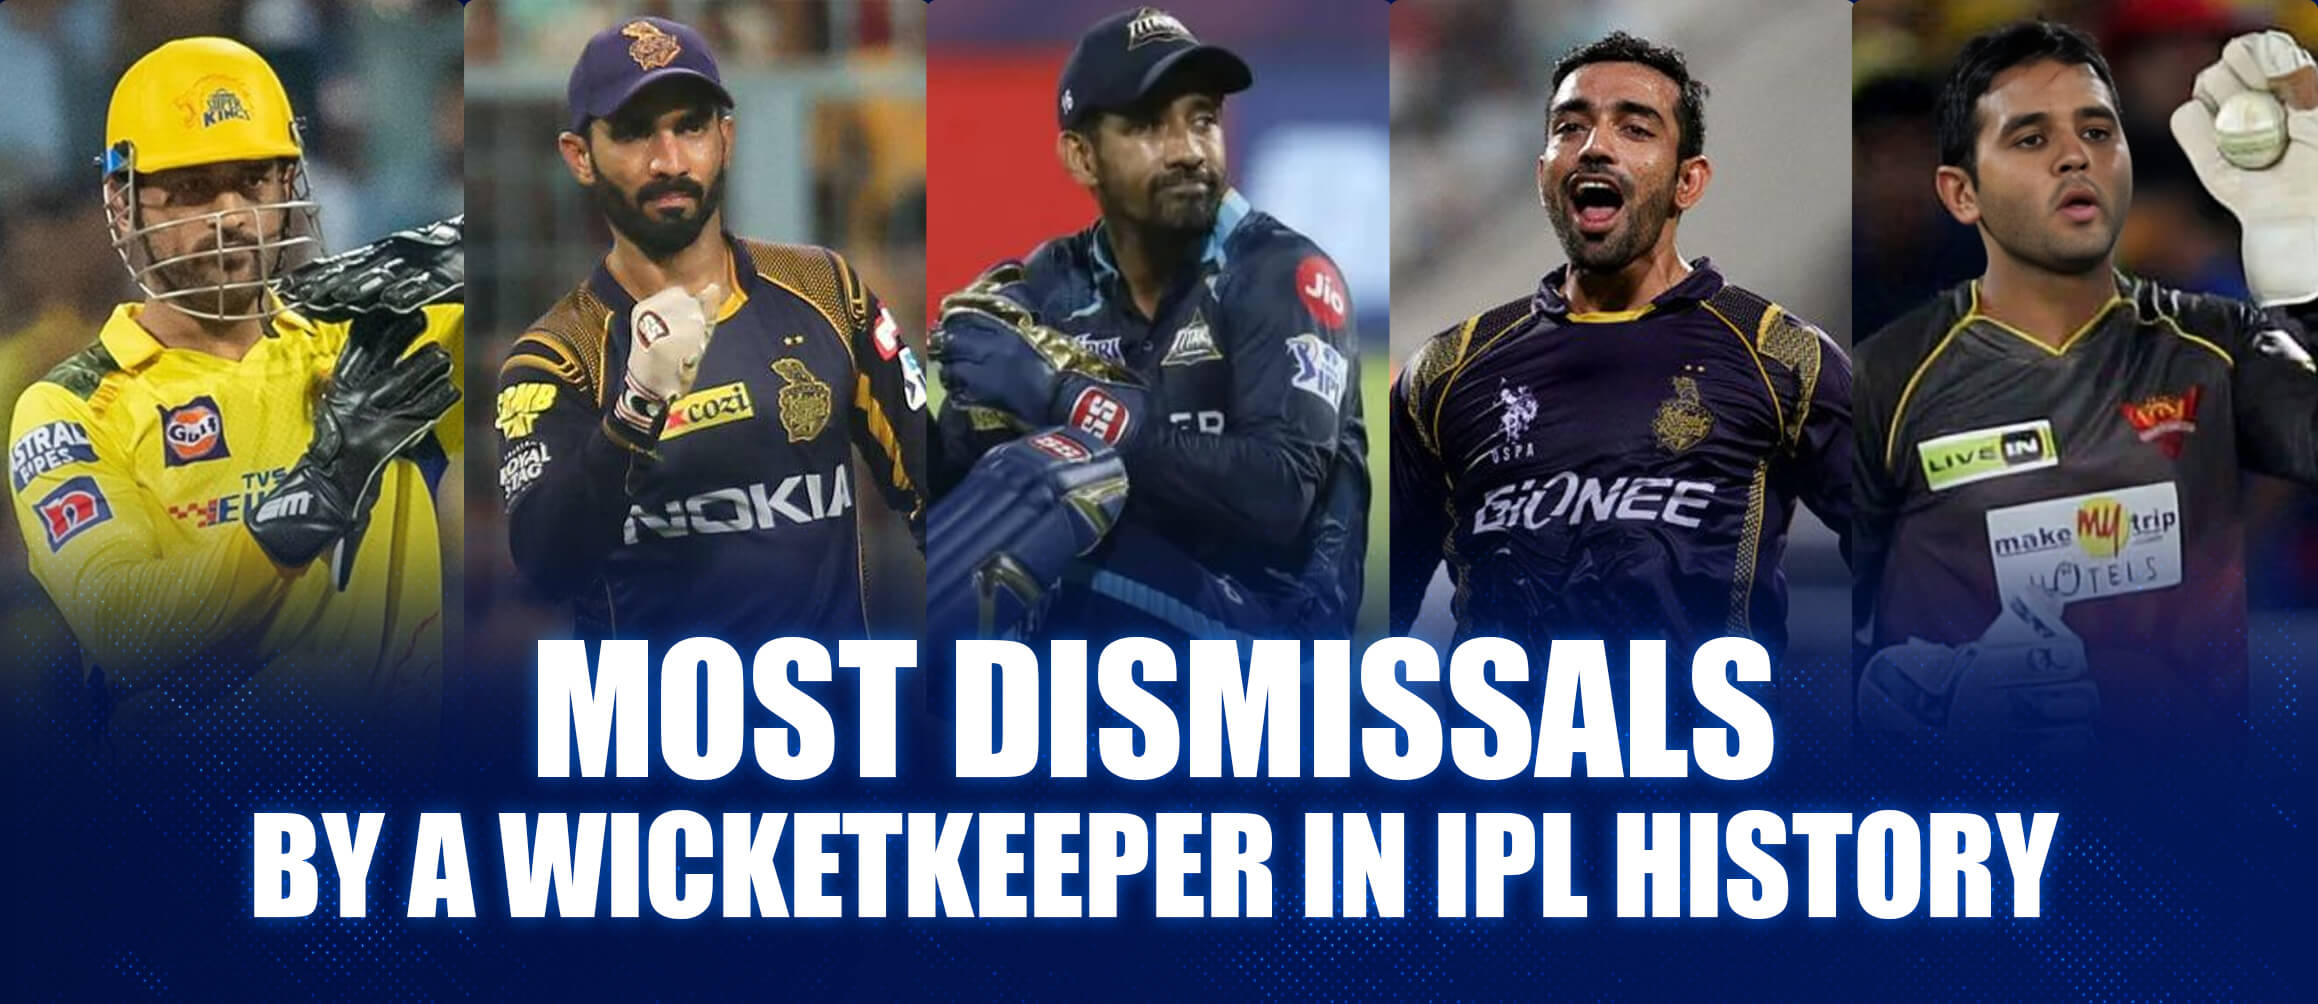 Most Dismissals by A Wicketkeeper in IPL History